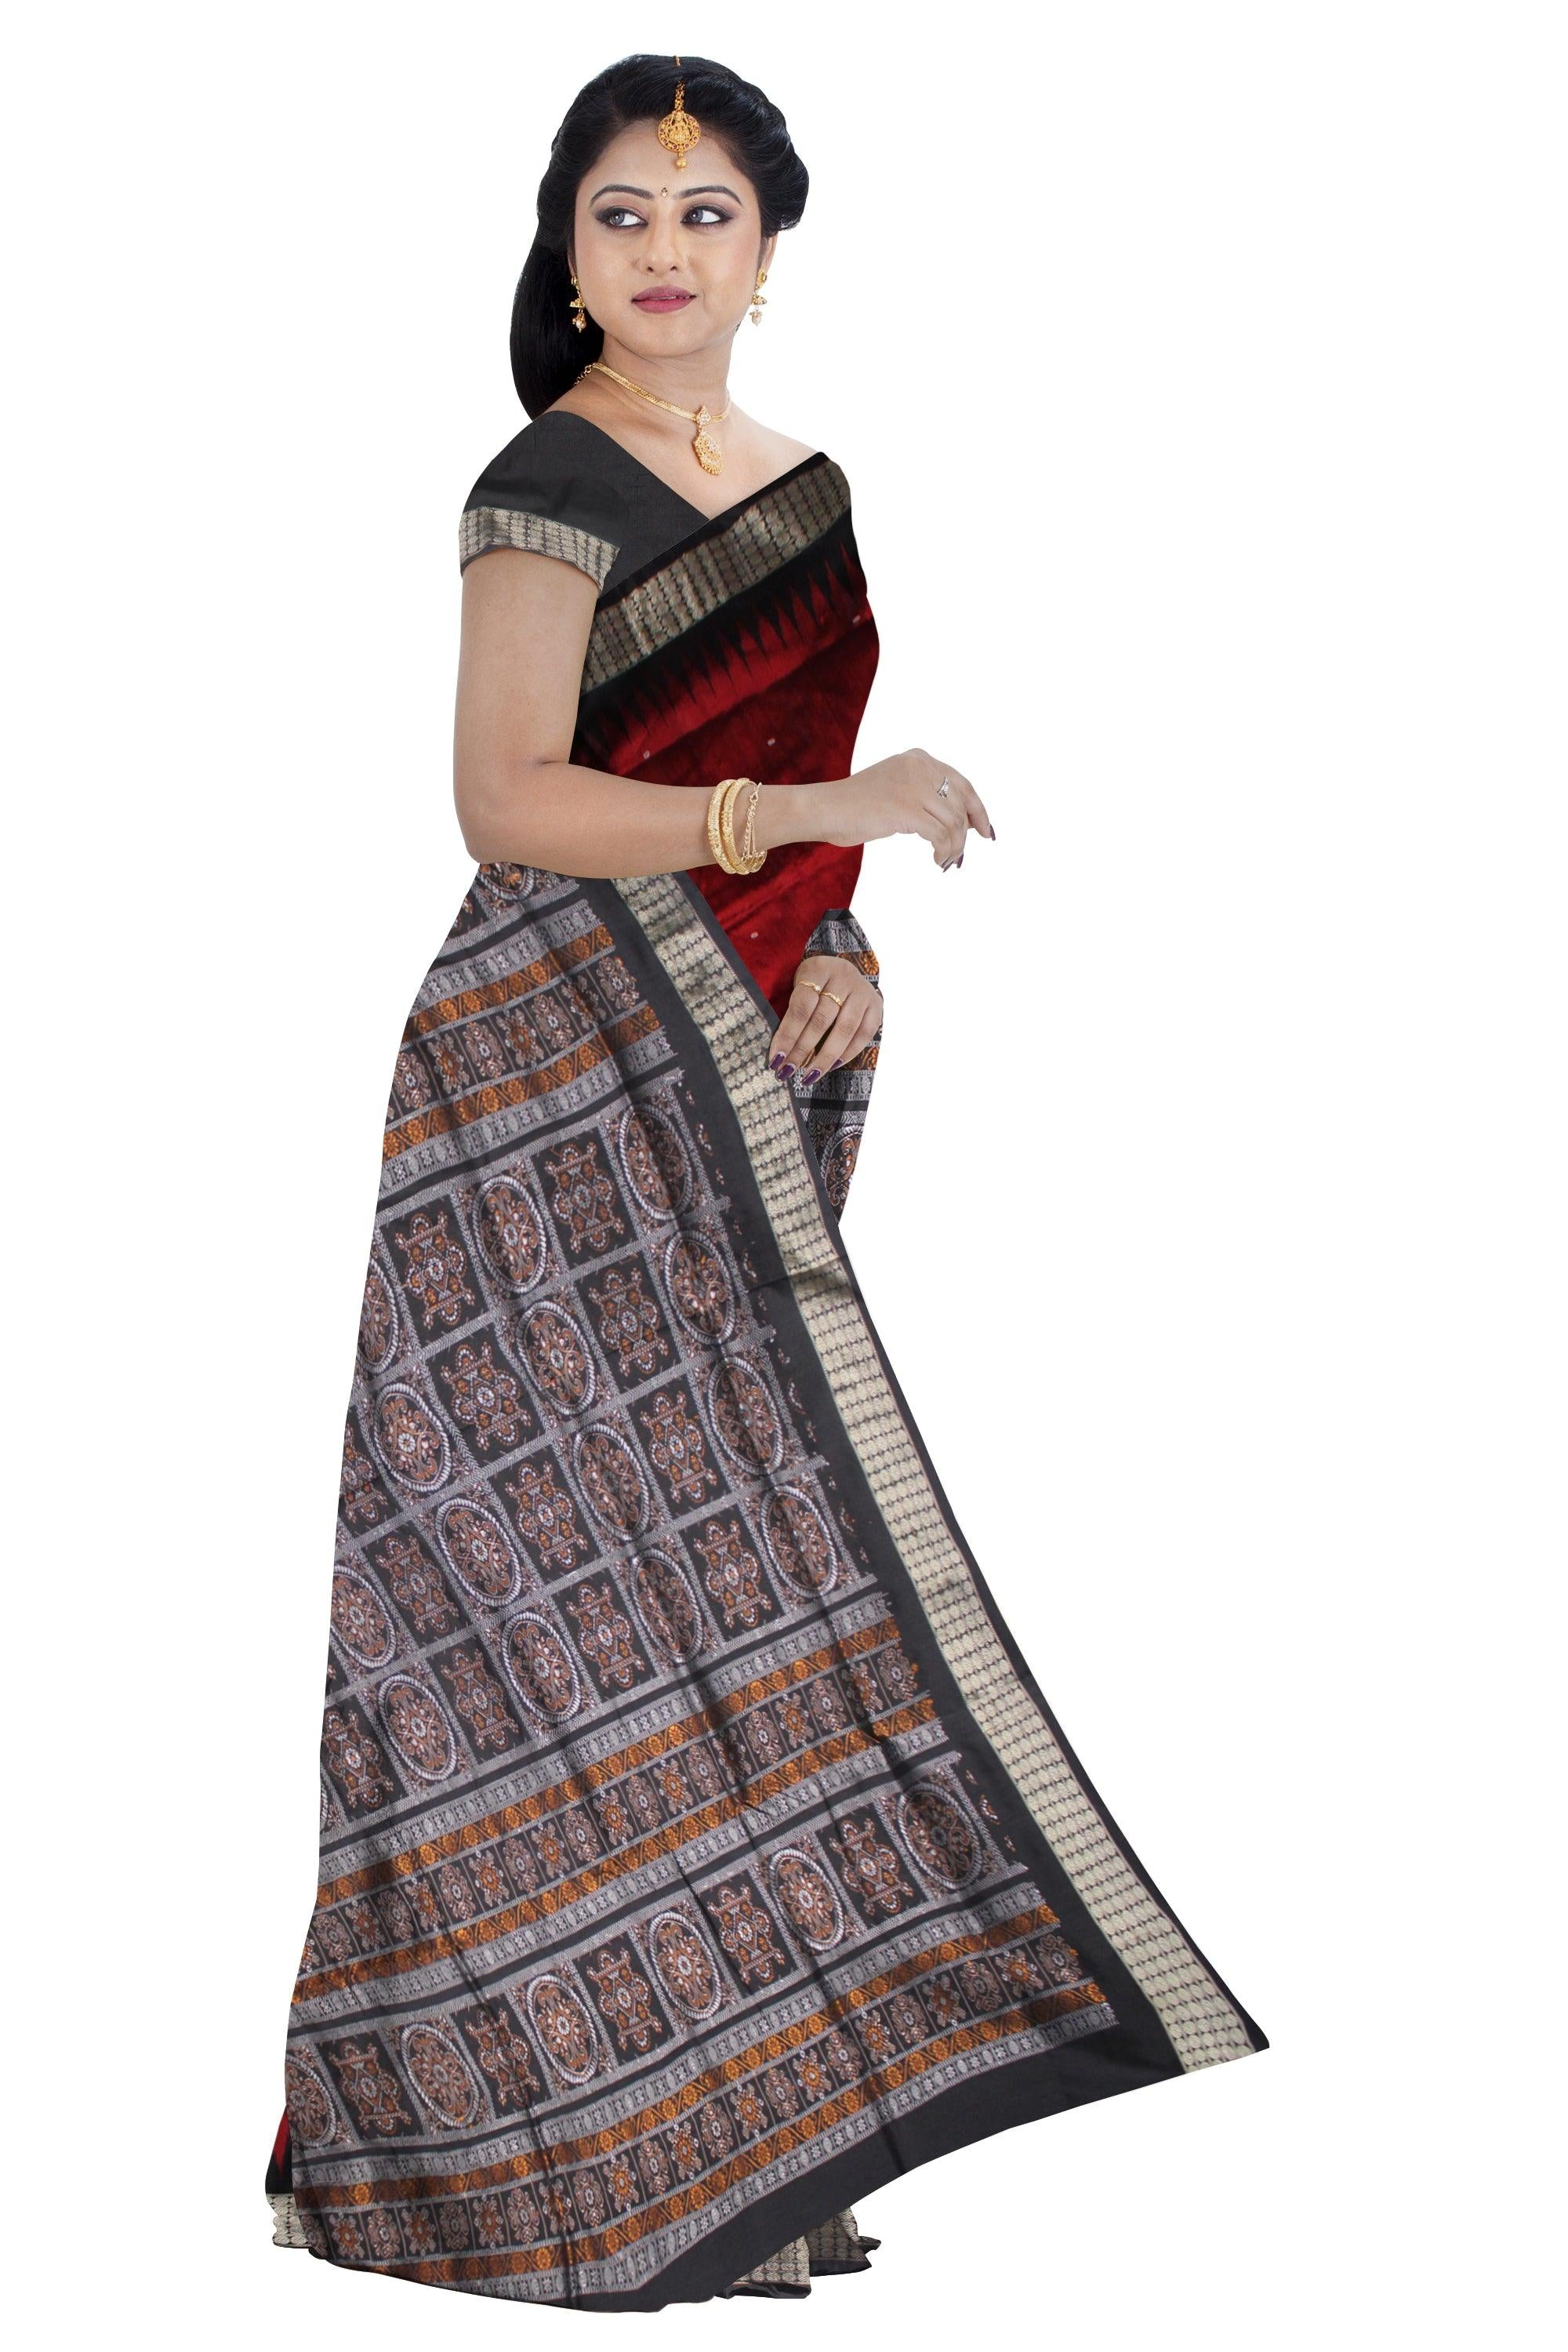 MAROON AND BLACK COLOR BOOTY PATTERN PATA SAREE, WITH PALLU NEW DESIGN BOMKEI PATTERN, AVAILABLE WITH BLOUSE PIECE. - Koshali Arts & Crafts Enterprise